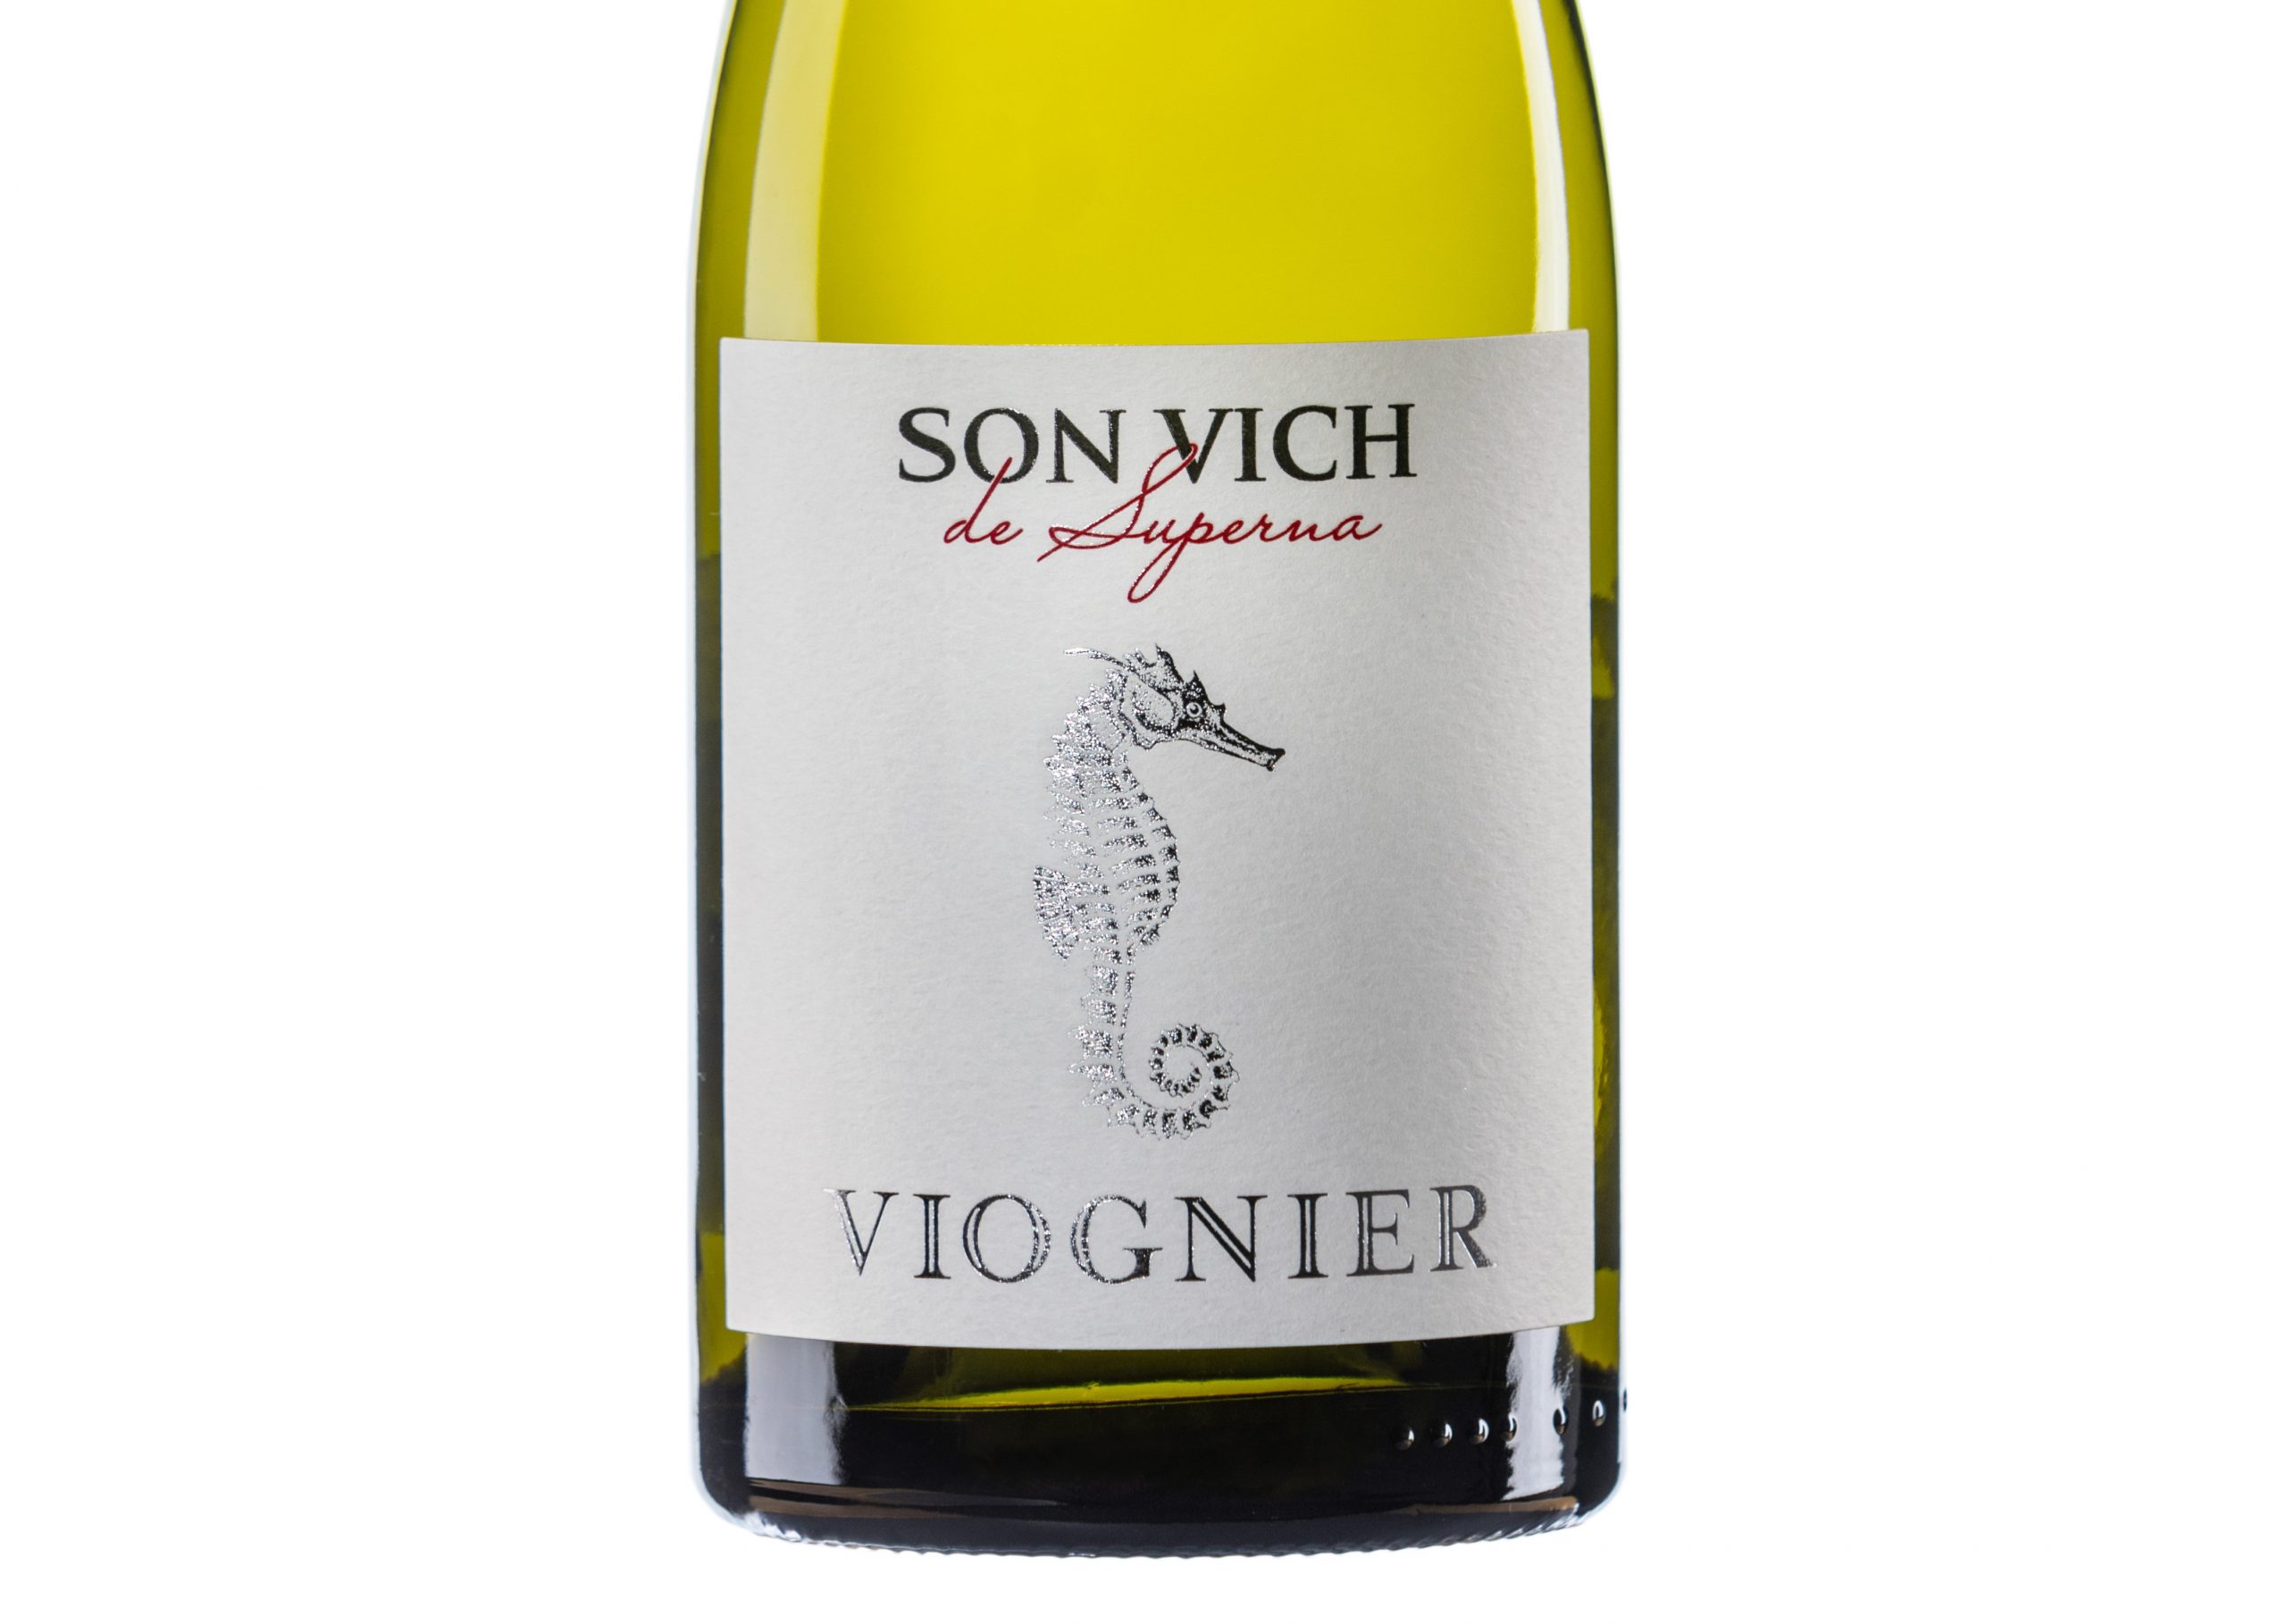 Introducing the new image of our Viognier